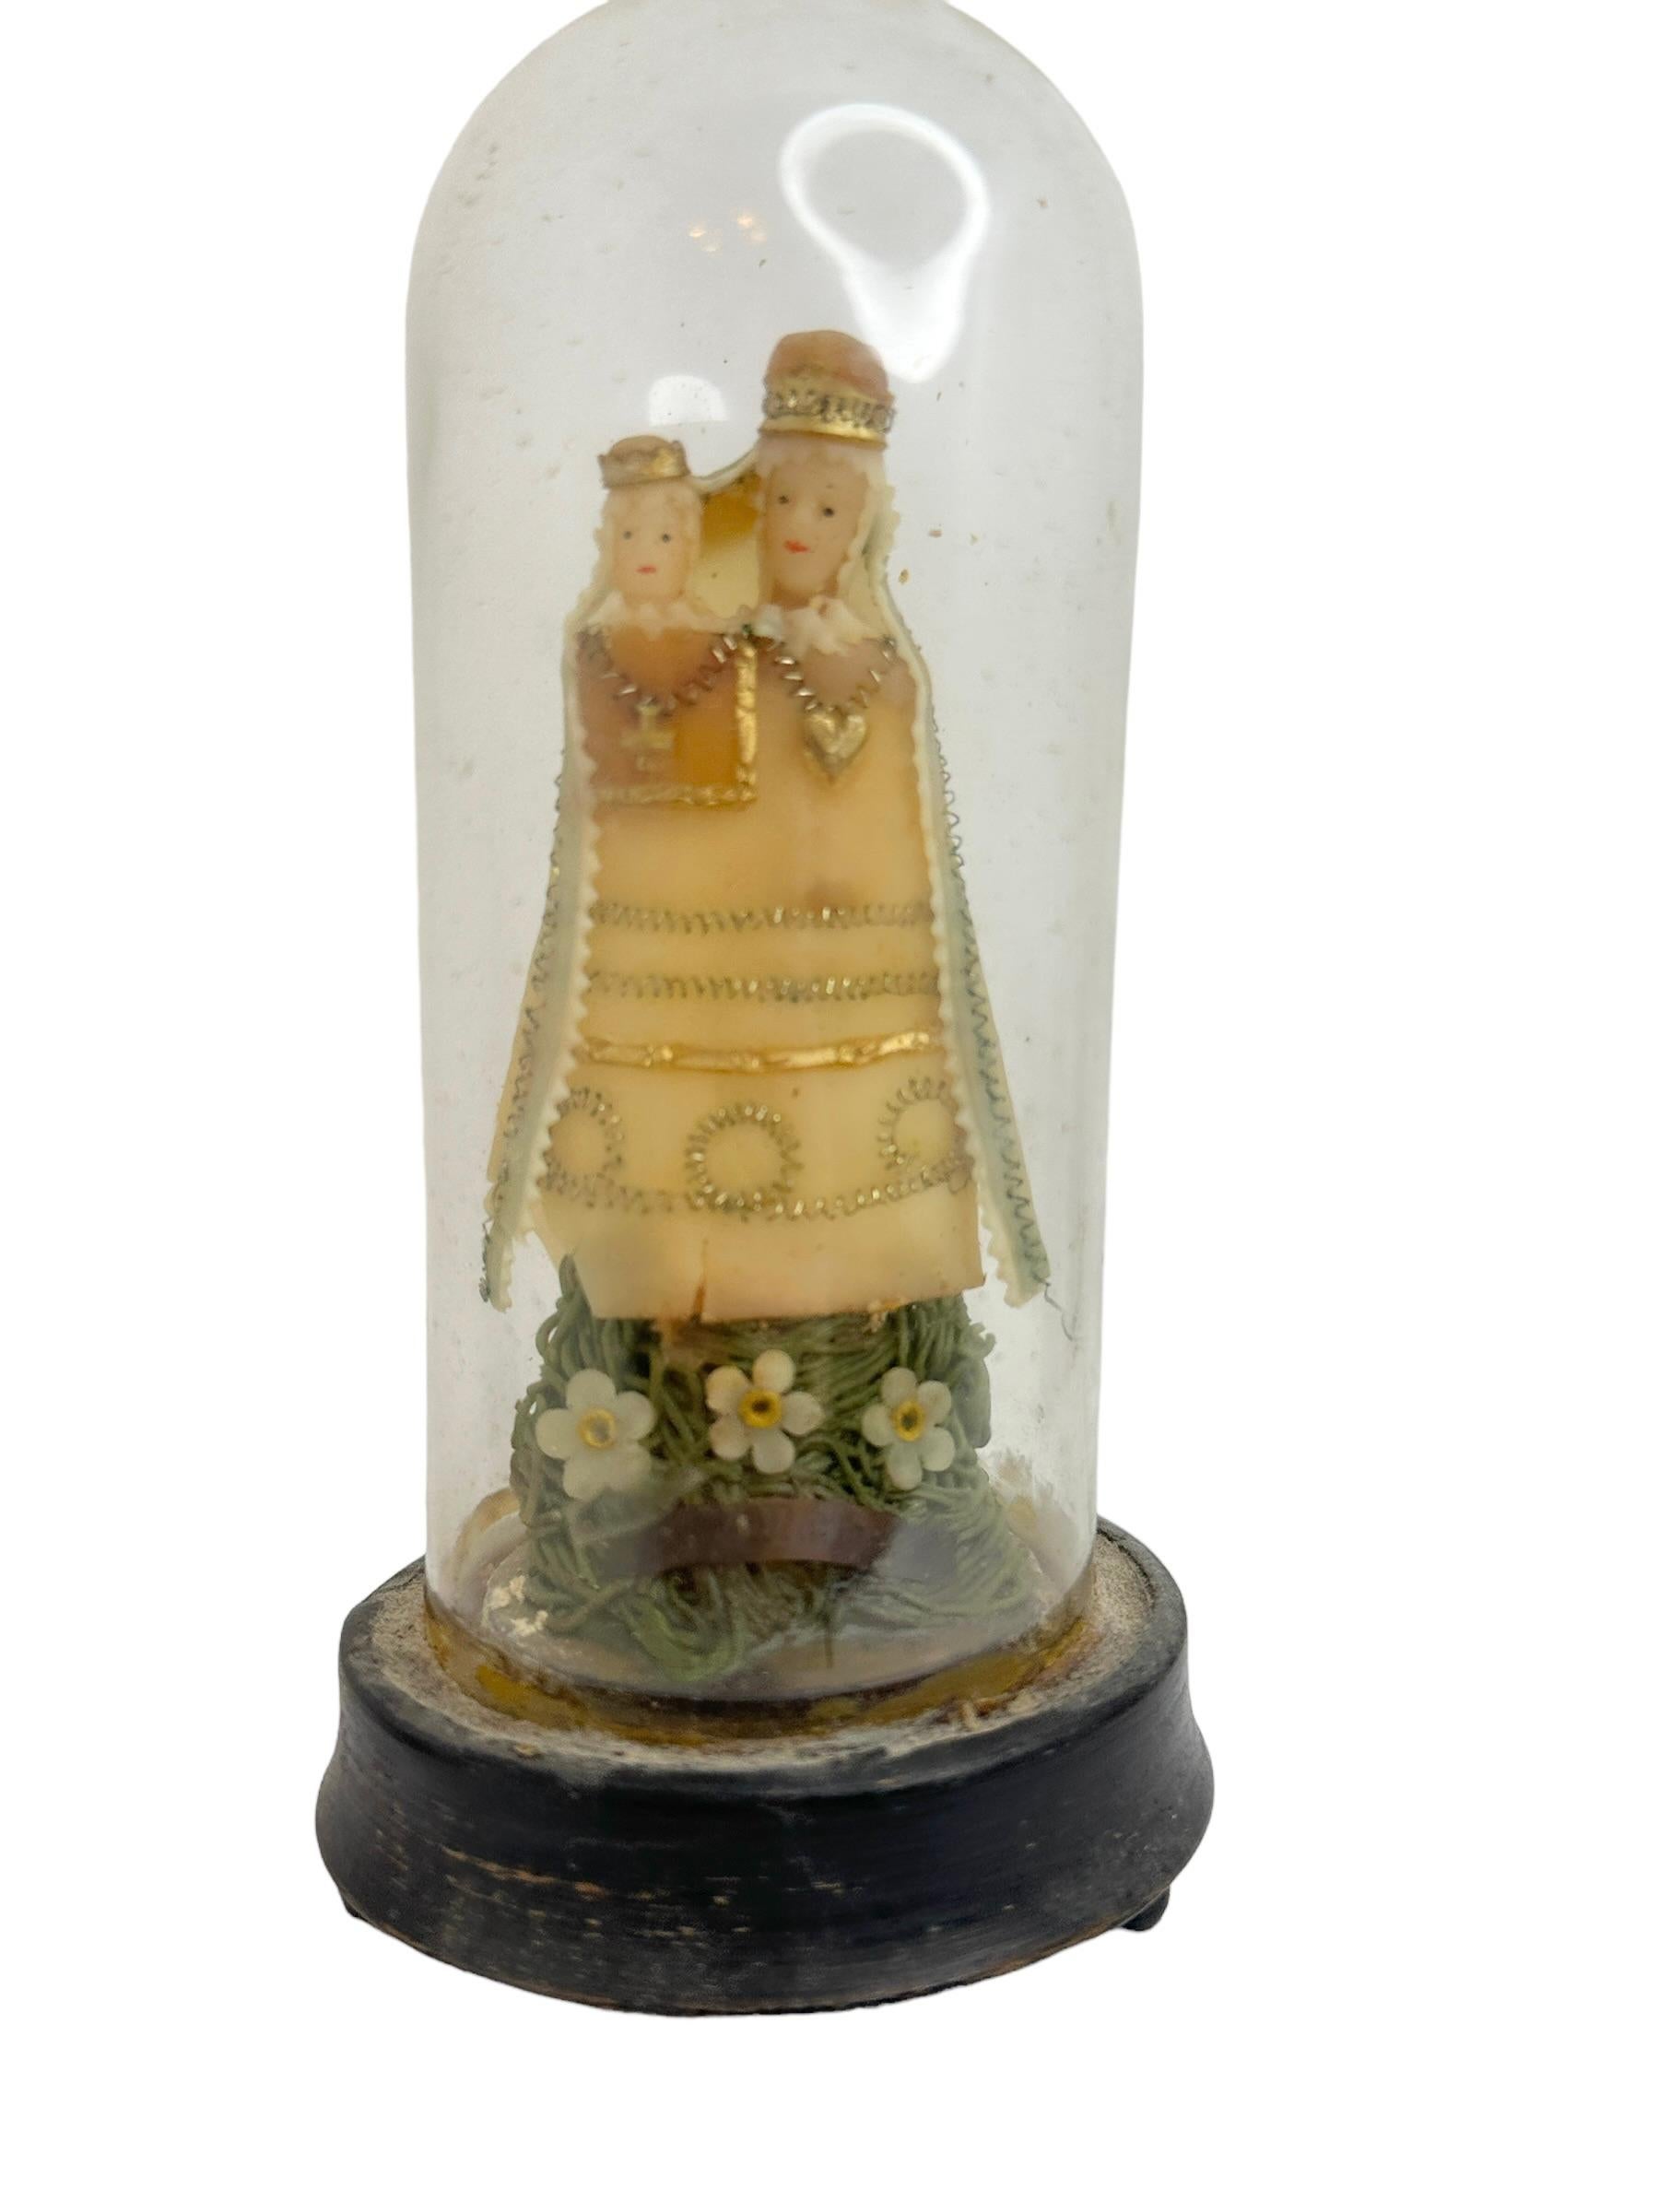 Here I have to offer a fine antique classic early 20th century Glass Display Case with a beautiful Monastery Work inside. A wonderful decorative item, in very nice as is condition.
This is a truly fine antique old piece. Great Item in your home. As